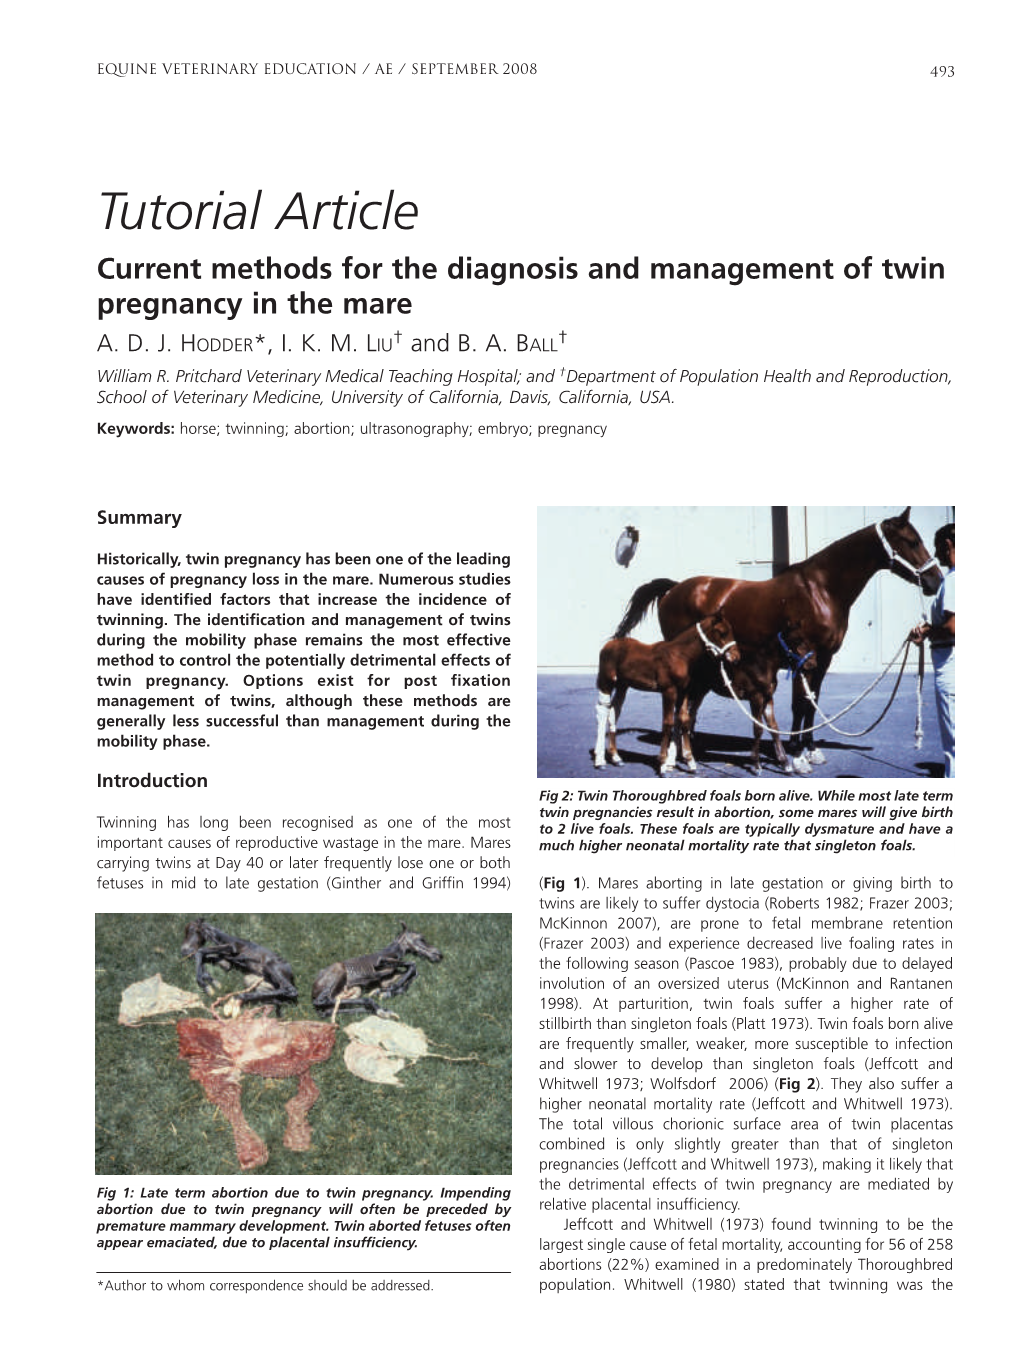 Tutorial Article Current Methods for the Diagnosis and Management of Twin Pregnancy in the Mare A